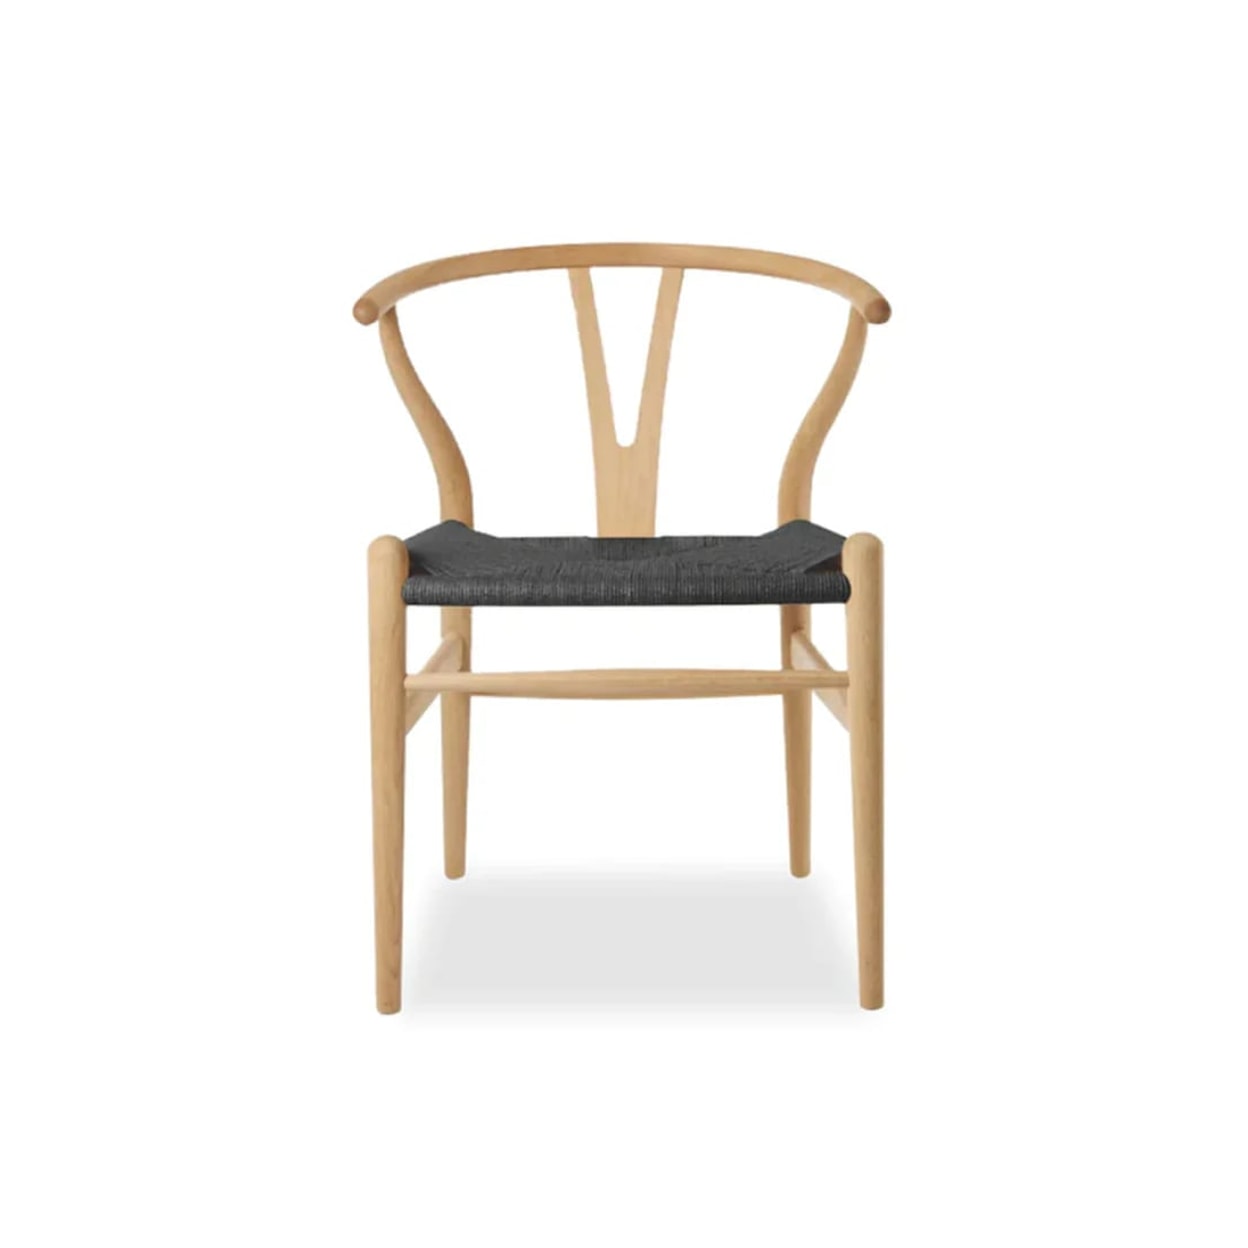 Primitive Collections Wishbone Dining Chair